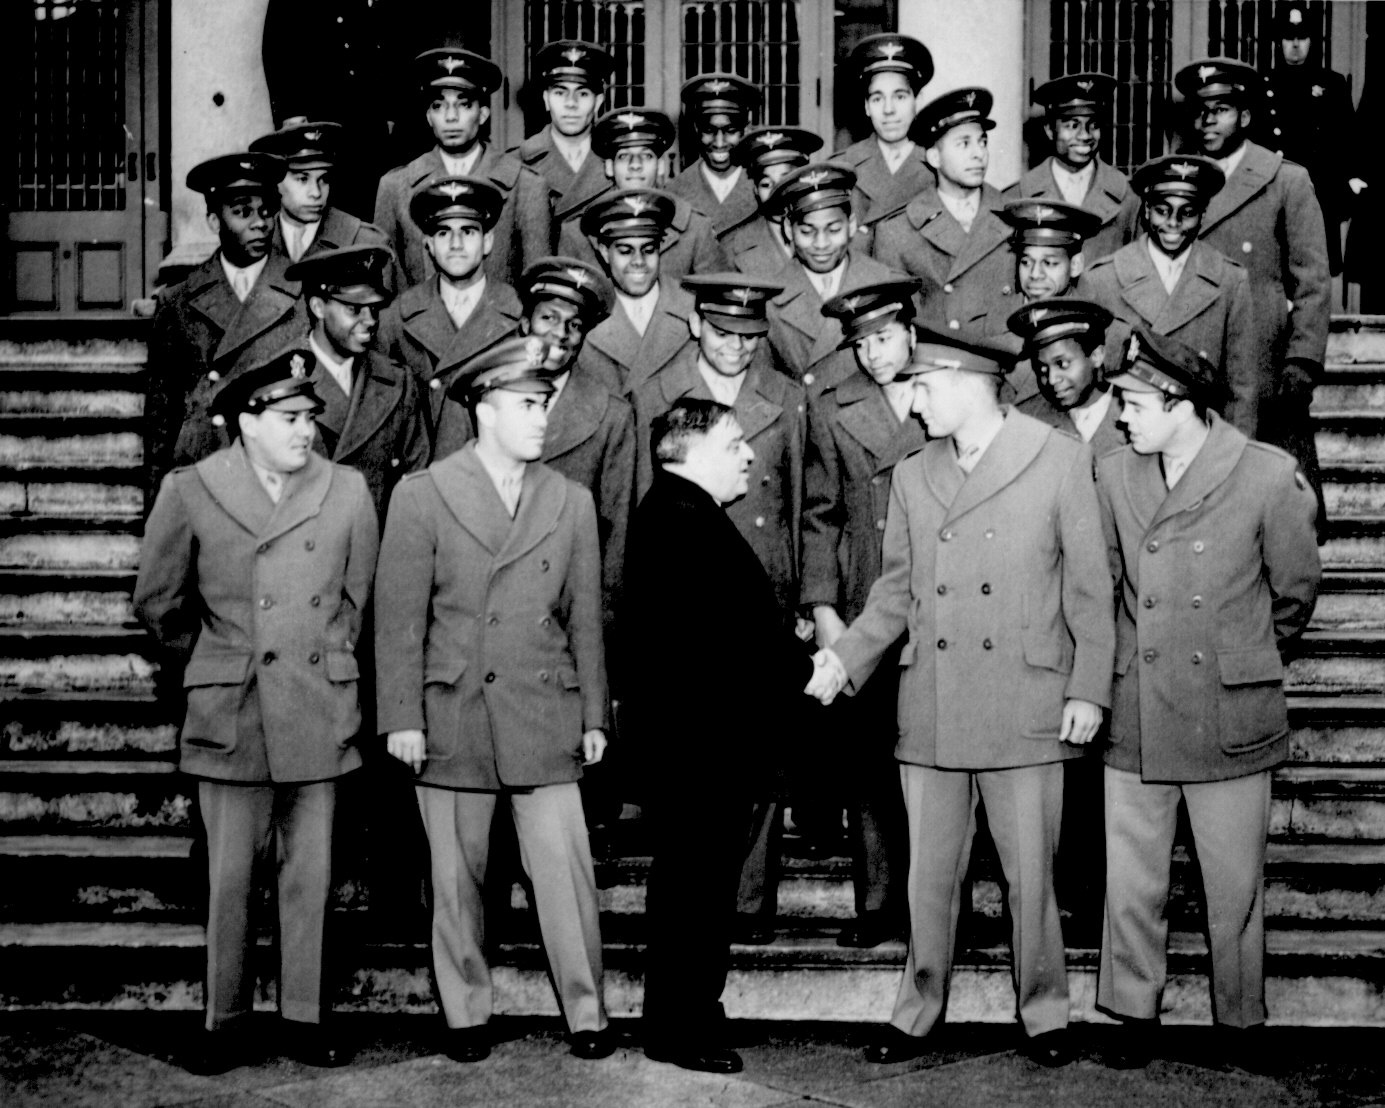 Mayor Fiorello H. La Guardia of New York City, New York, United States greeting Major Galen B. Price and his African-American cadets of US Army Air Forces, 16 Feb 1944